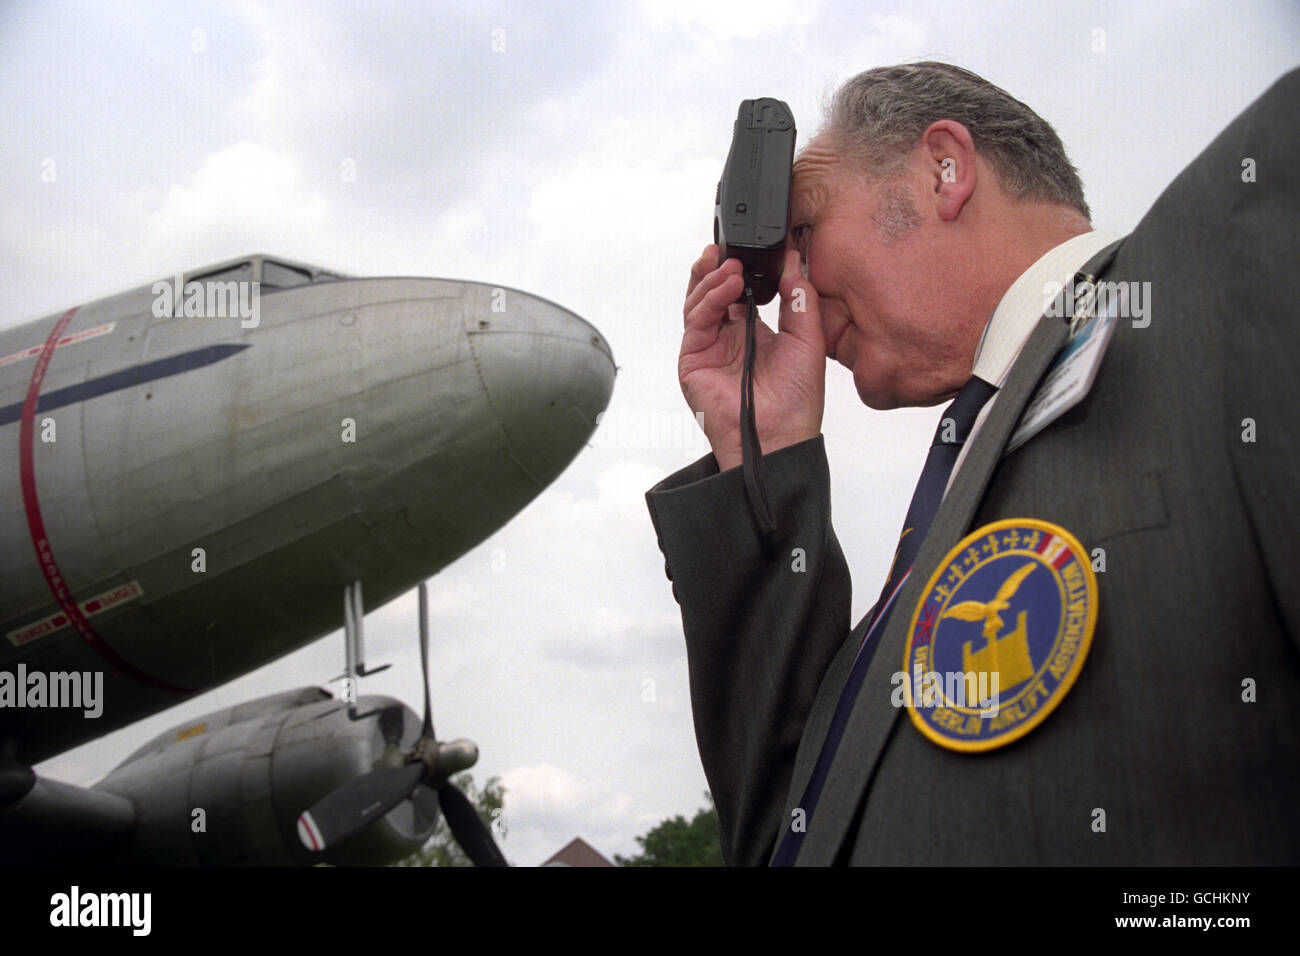 REV. PETER FURNESS OF THE BRITISH AIRLIFT ASSOCIATION PHOTOGRAPHS A DAKOTA THAT TOOK PART IN THE BERLIN AIRLIFT 50 YEARS AGO, AT A SERVICE IN BERLIN. Stock Photo